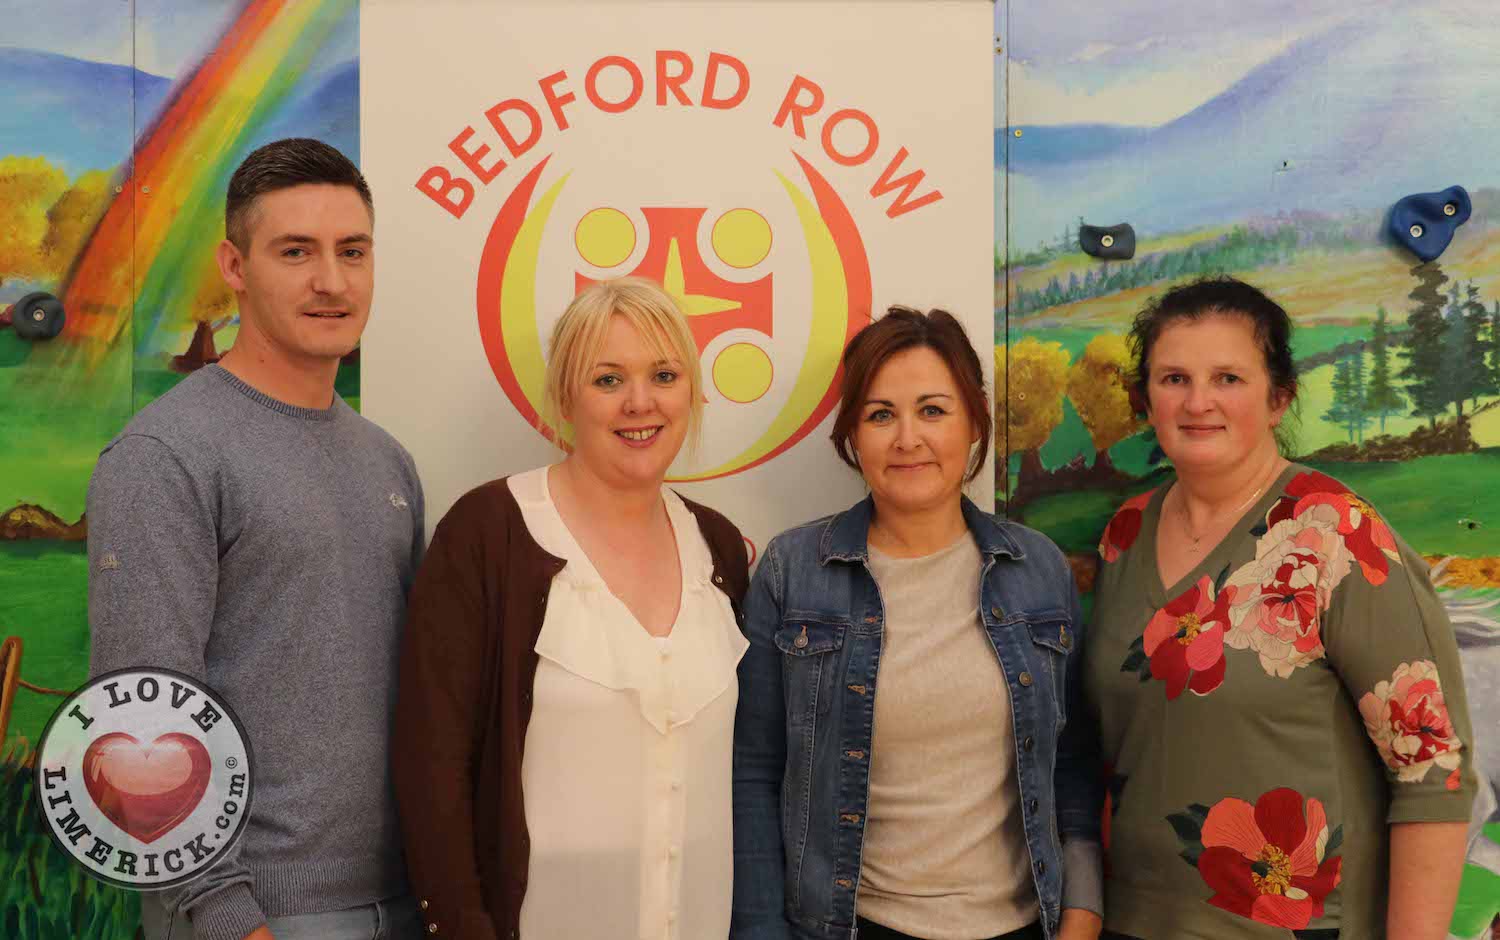 Bedford Family Row Project